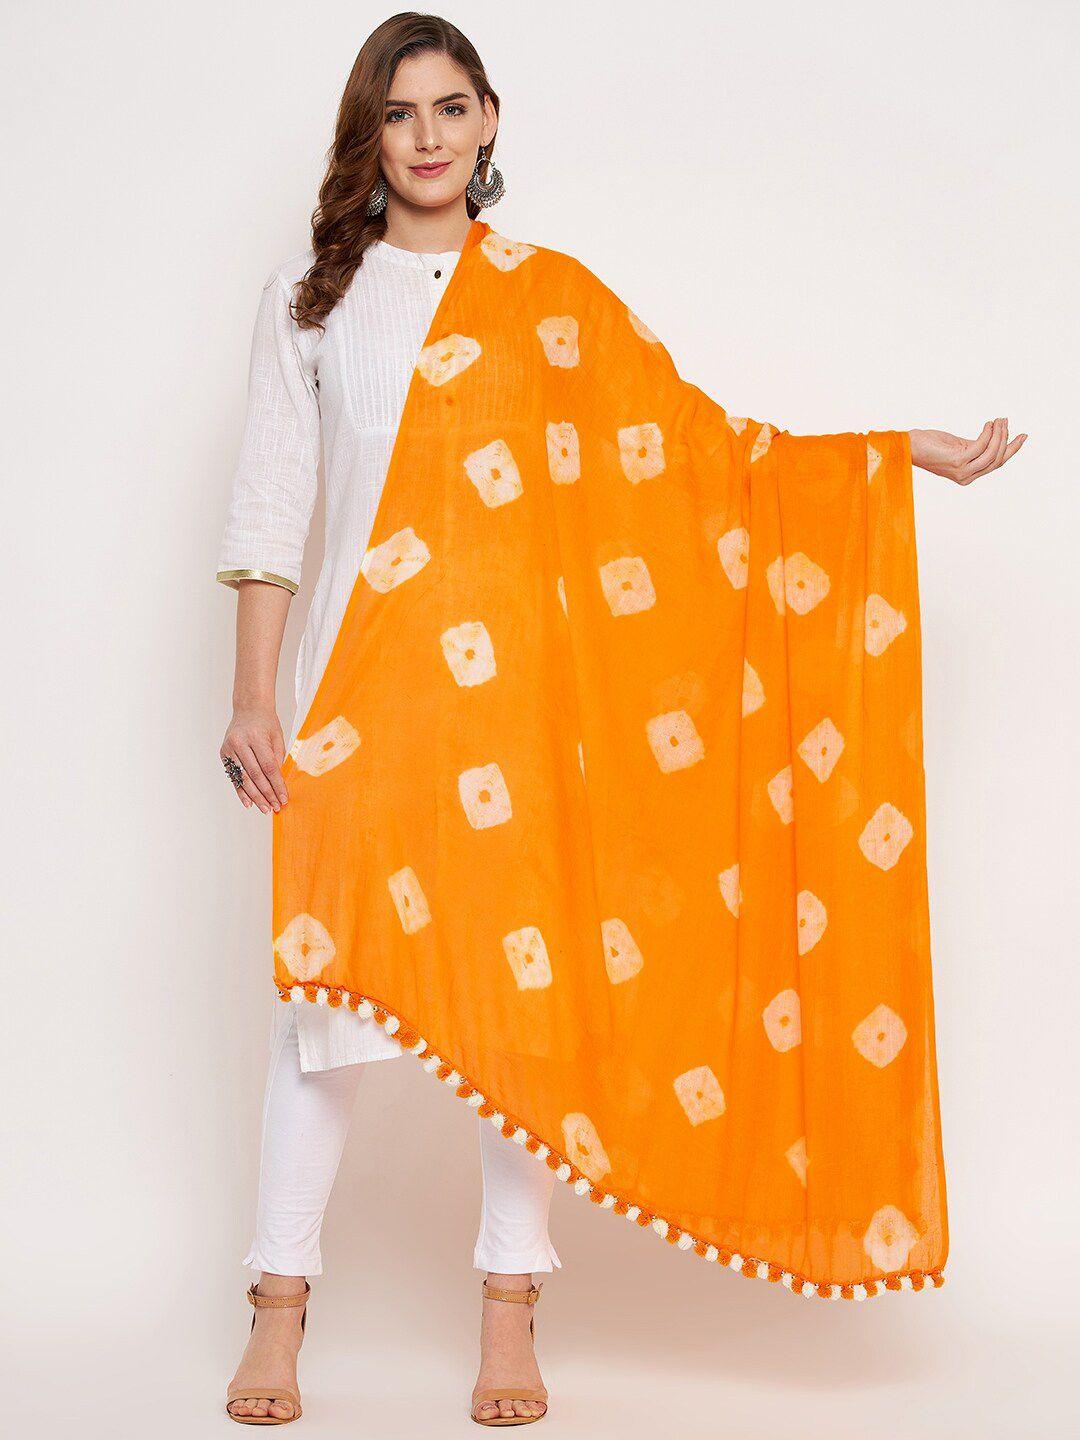 clora-creation-yellow-&-white-printed-pure-cotton-tie-and-dye-dupatta